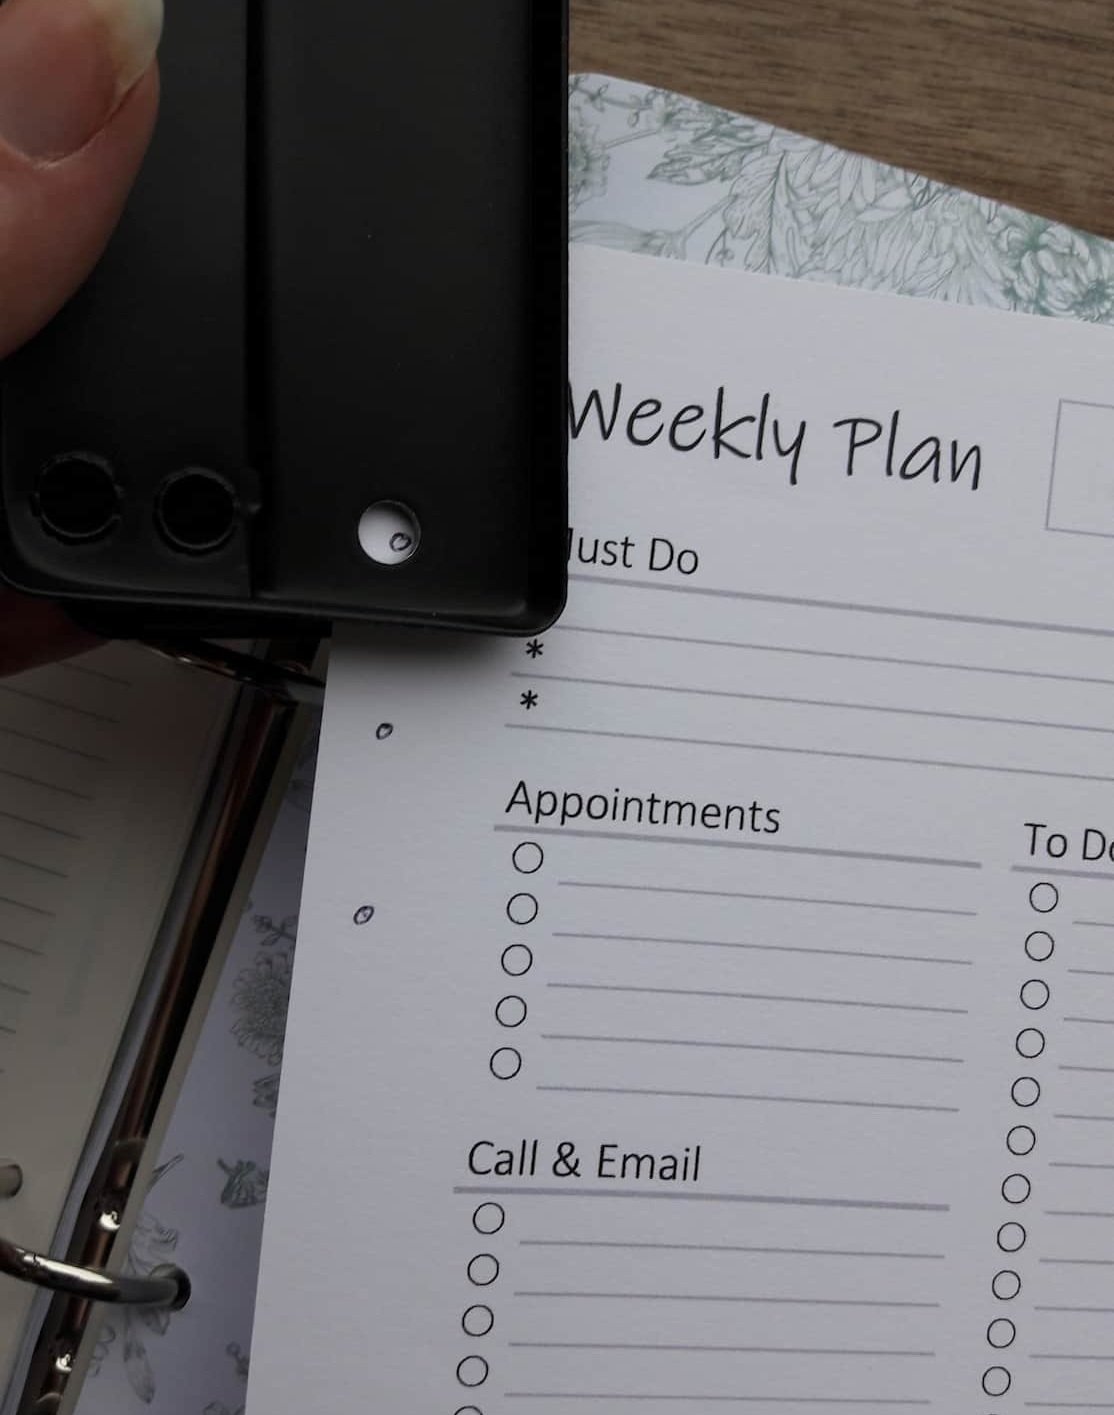 The Incredibly Simple Way to Hole Punch your Printable Planners